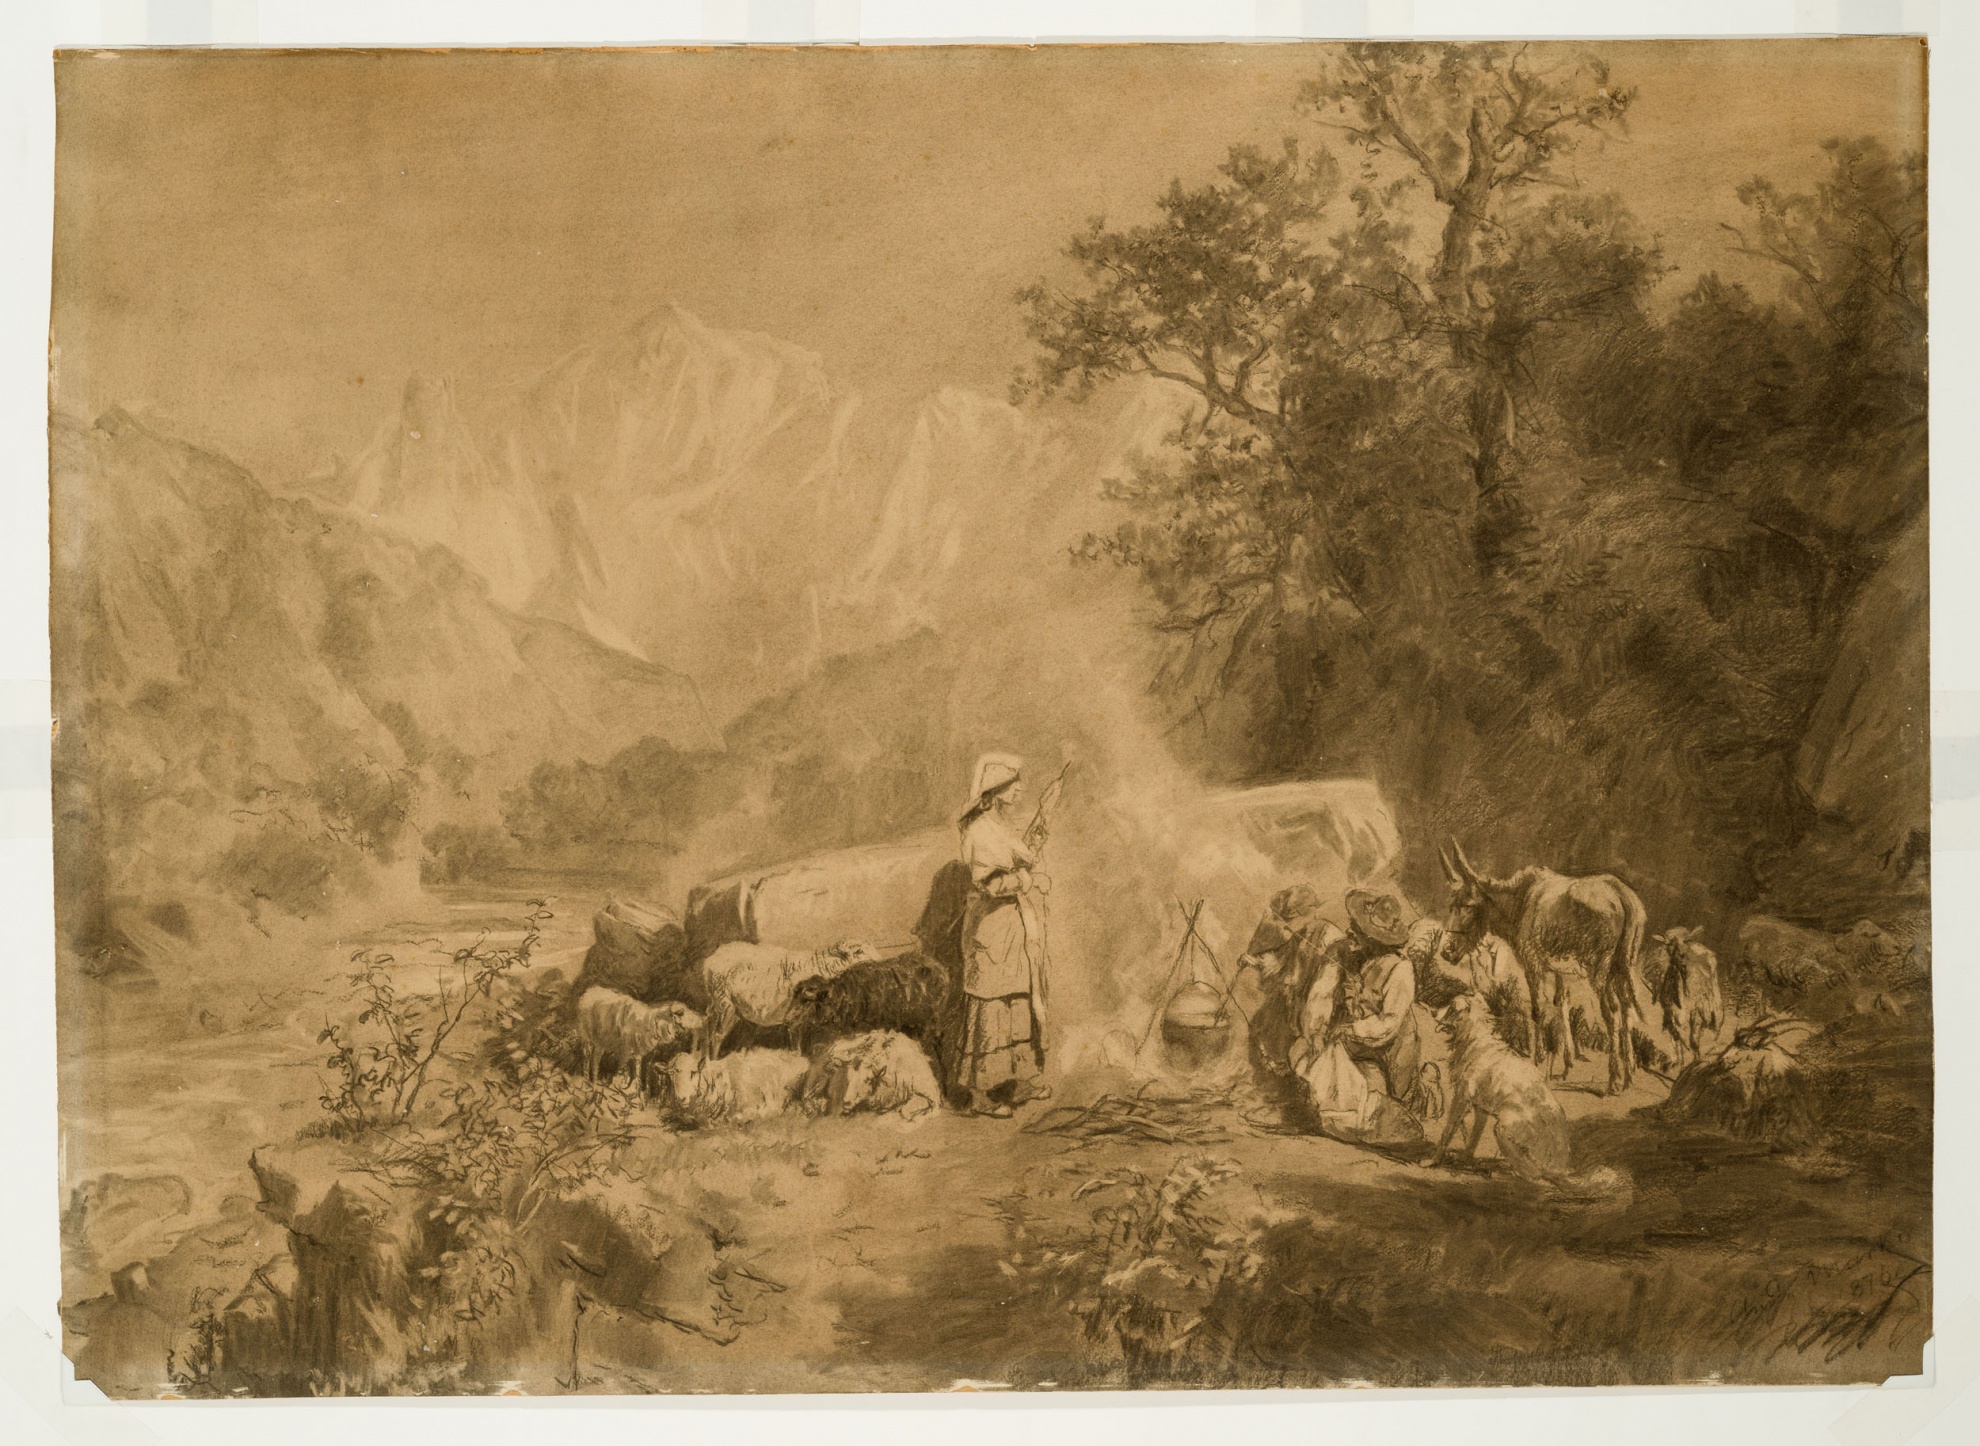 untitled (scene of mountain shepherds), (known as “Preparing the Meal”)
(The Salgo Trust for Education CC BY-NC-SA)